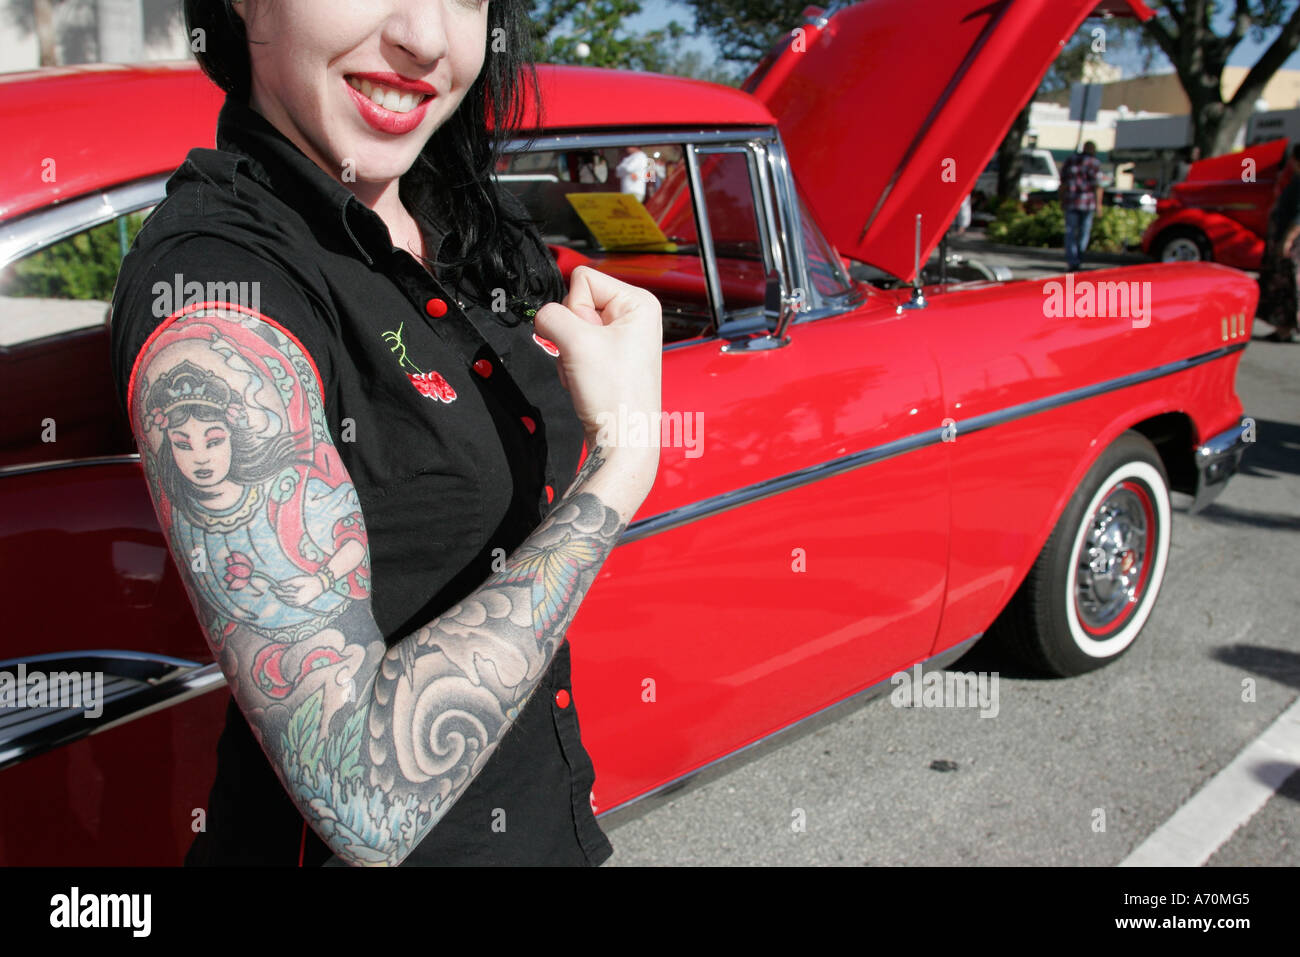 Hollywood Florida,Dream car cars Classic,antique,collector,red 1957 Chevrolet Bel Air,adult adults woman women female lady,arm,tattoo,visitors travel Stock Photo